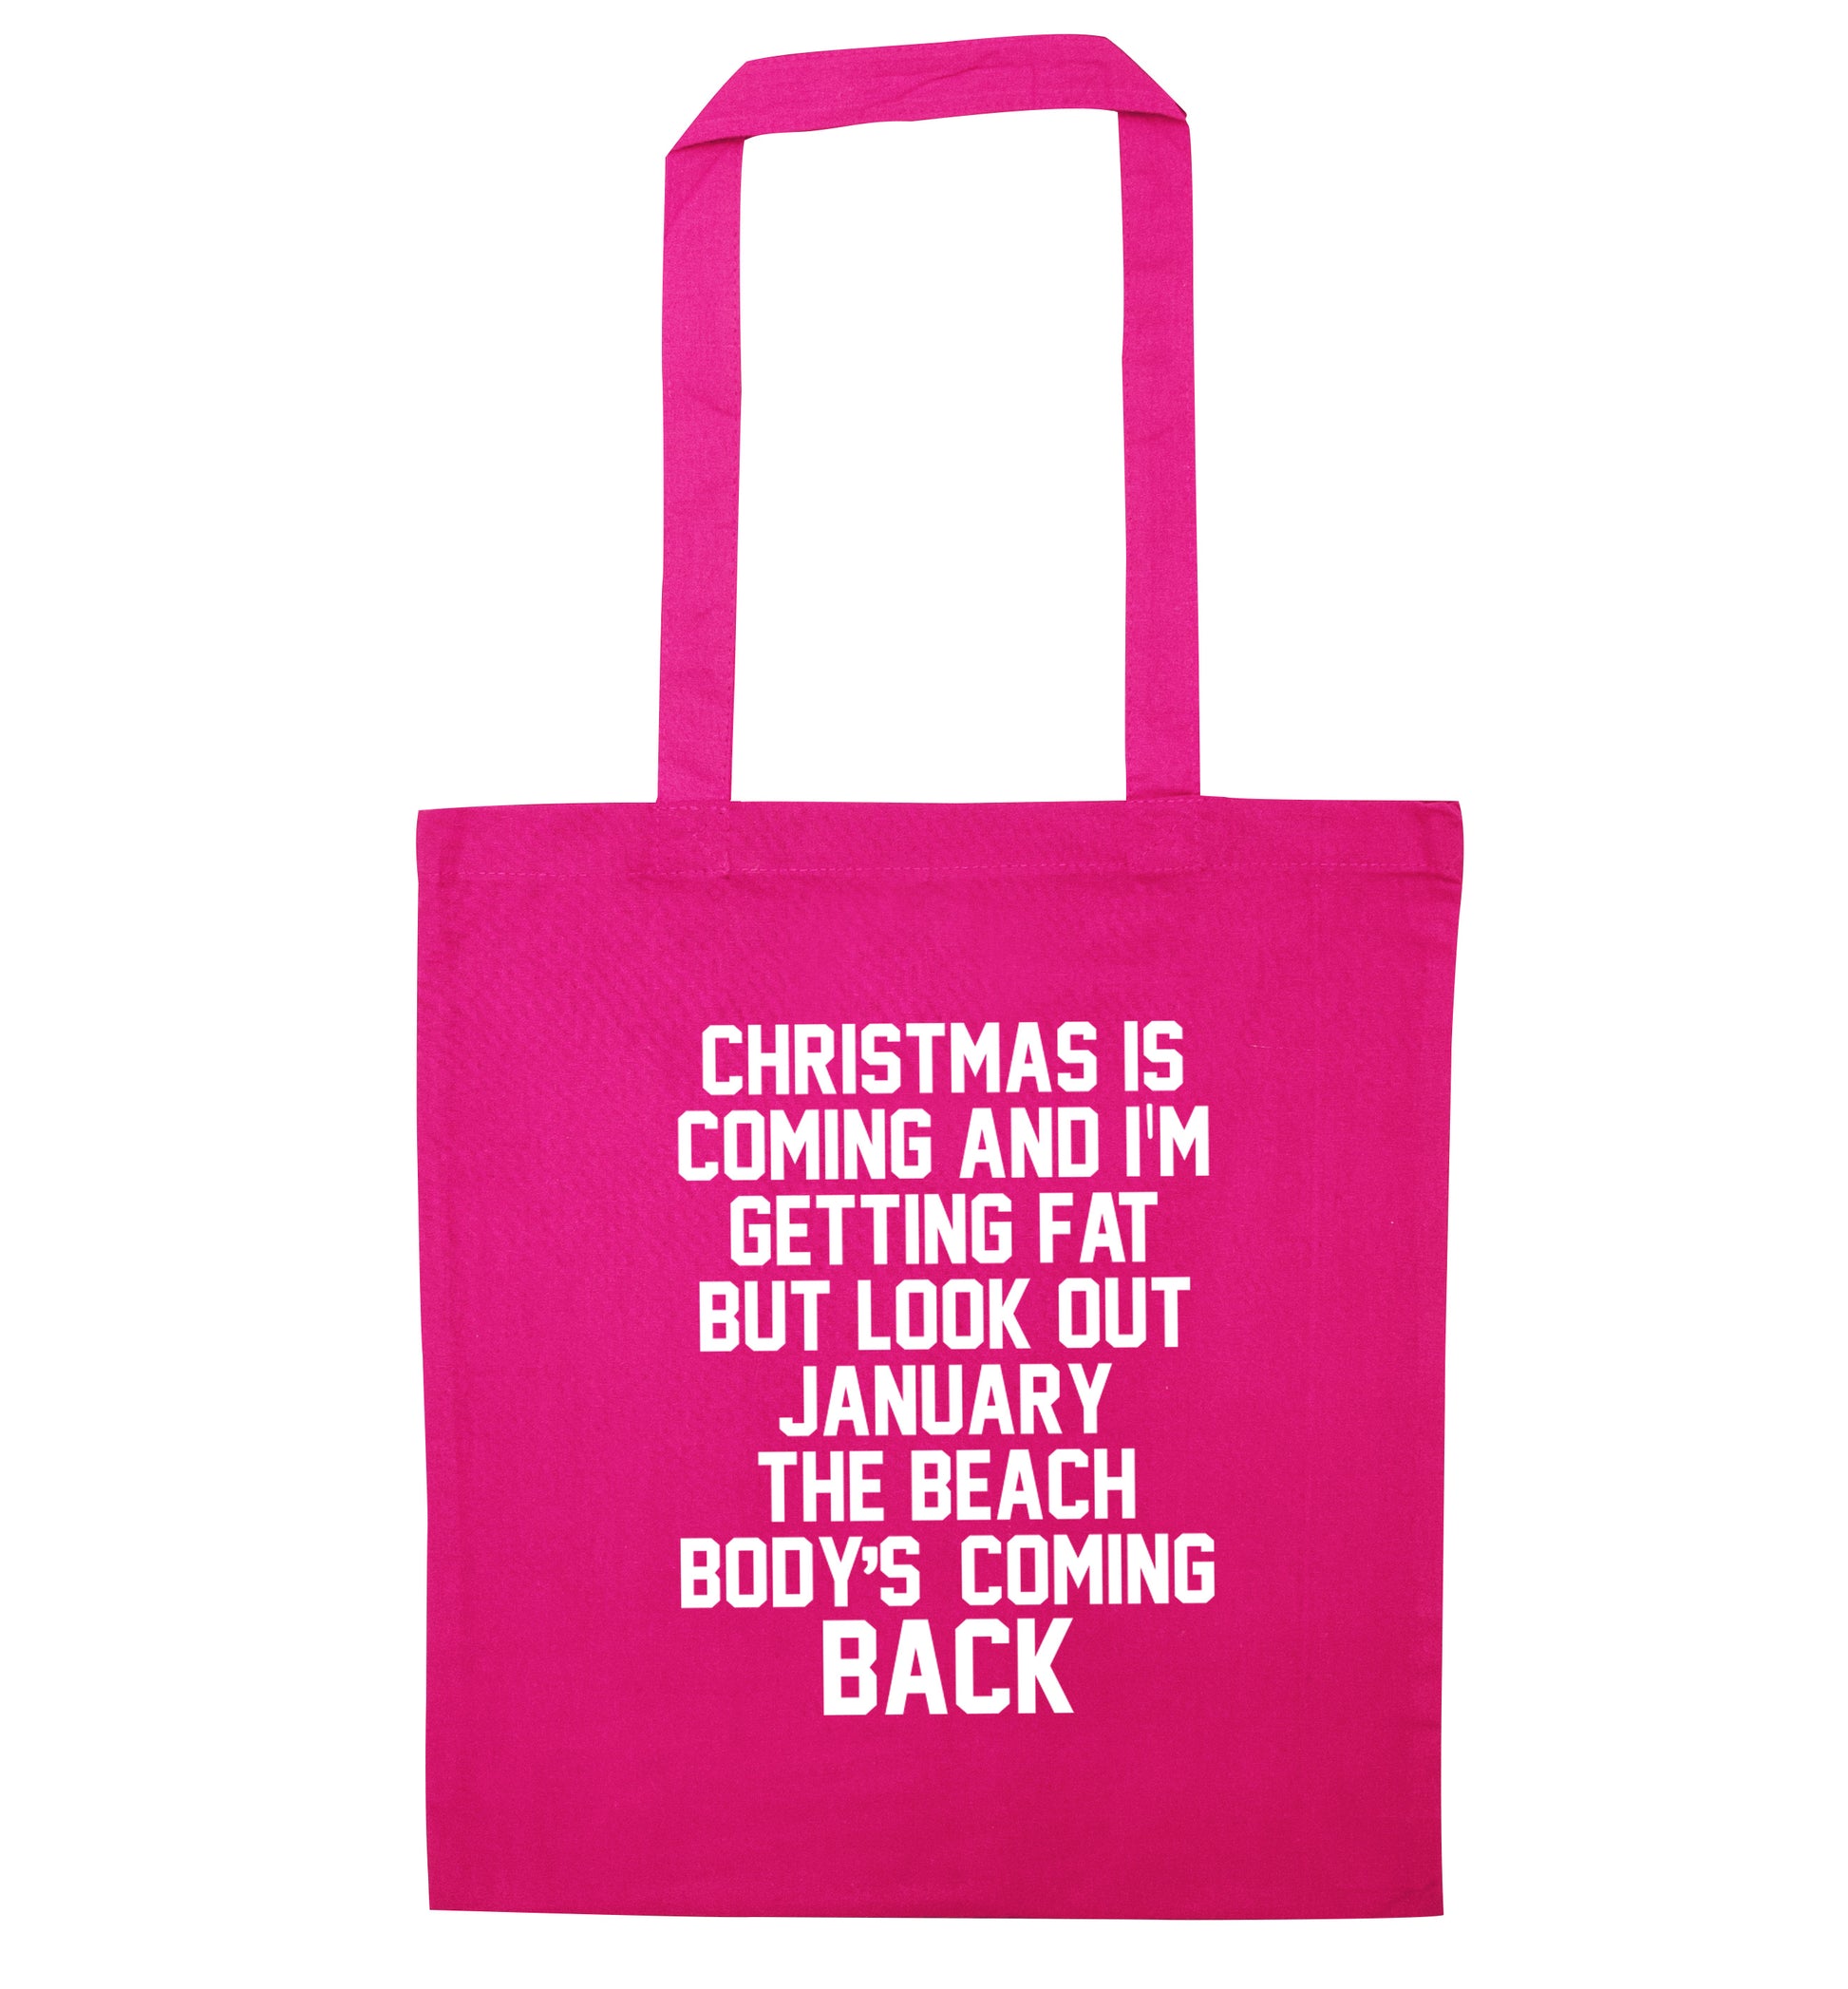 Christmas is coming and I'm getting fat but look out January the beach body's coming back! pink tote bag